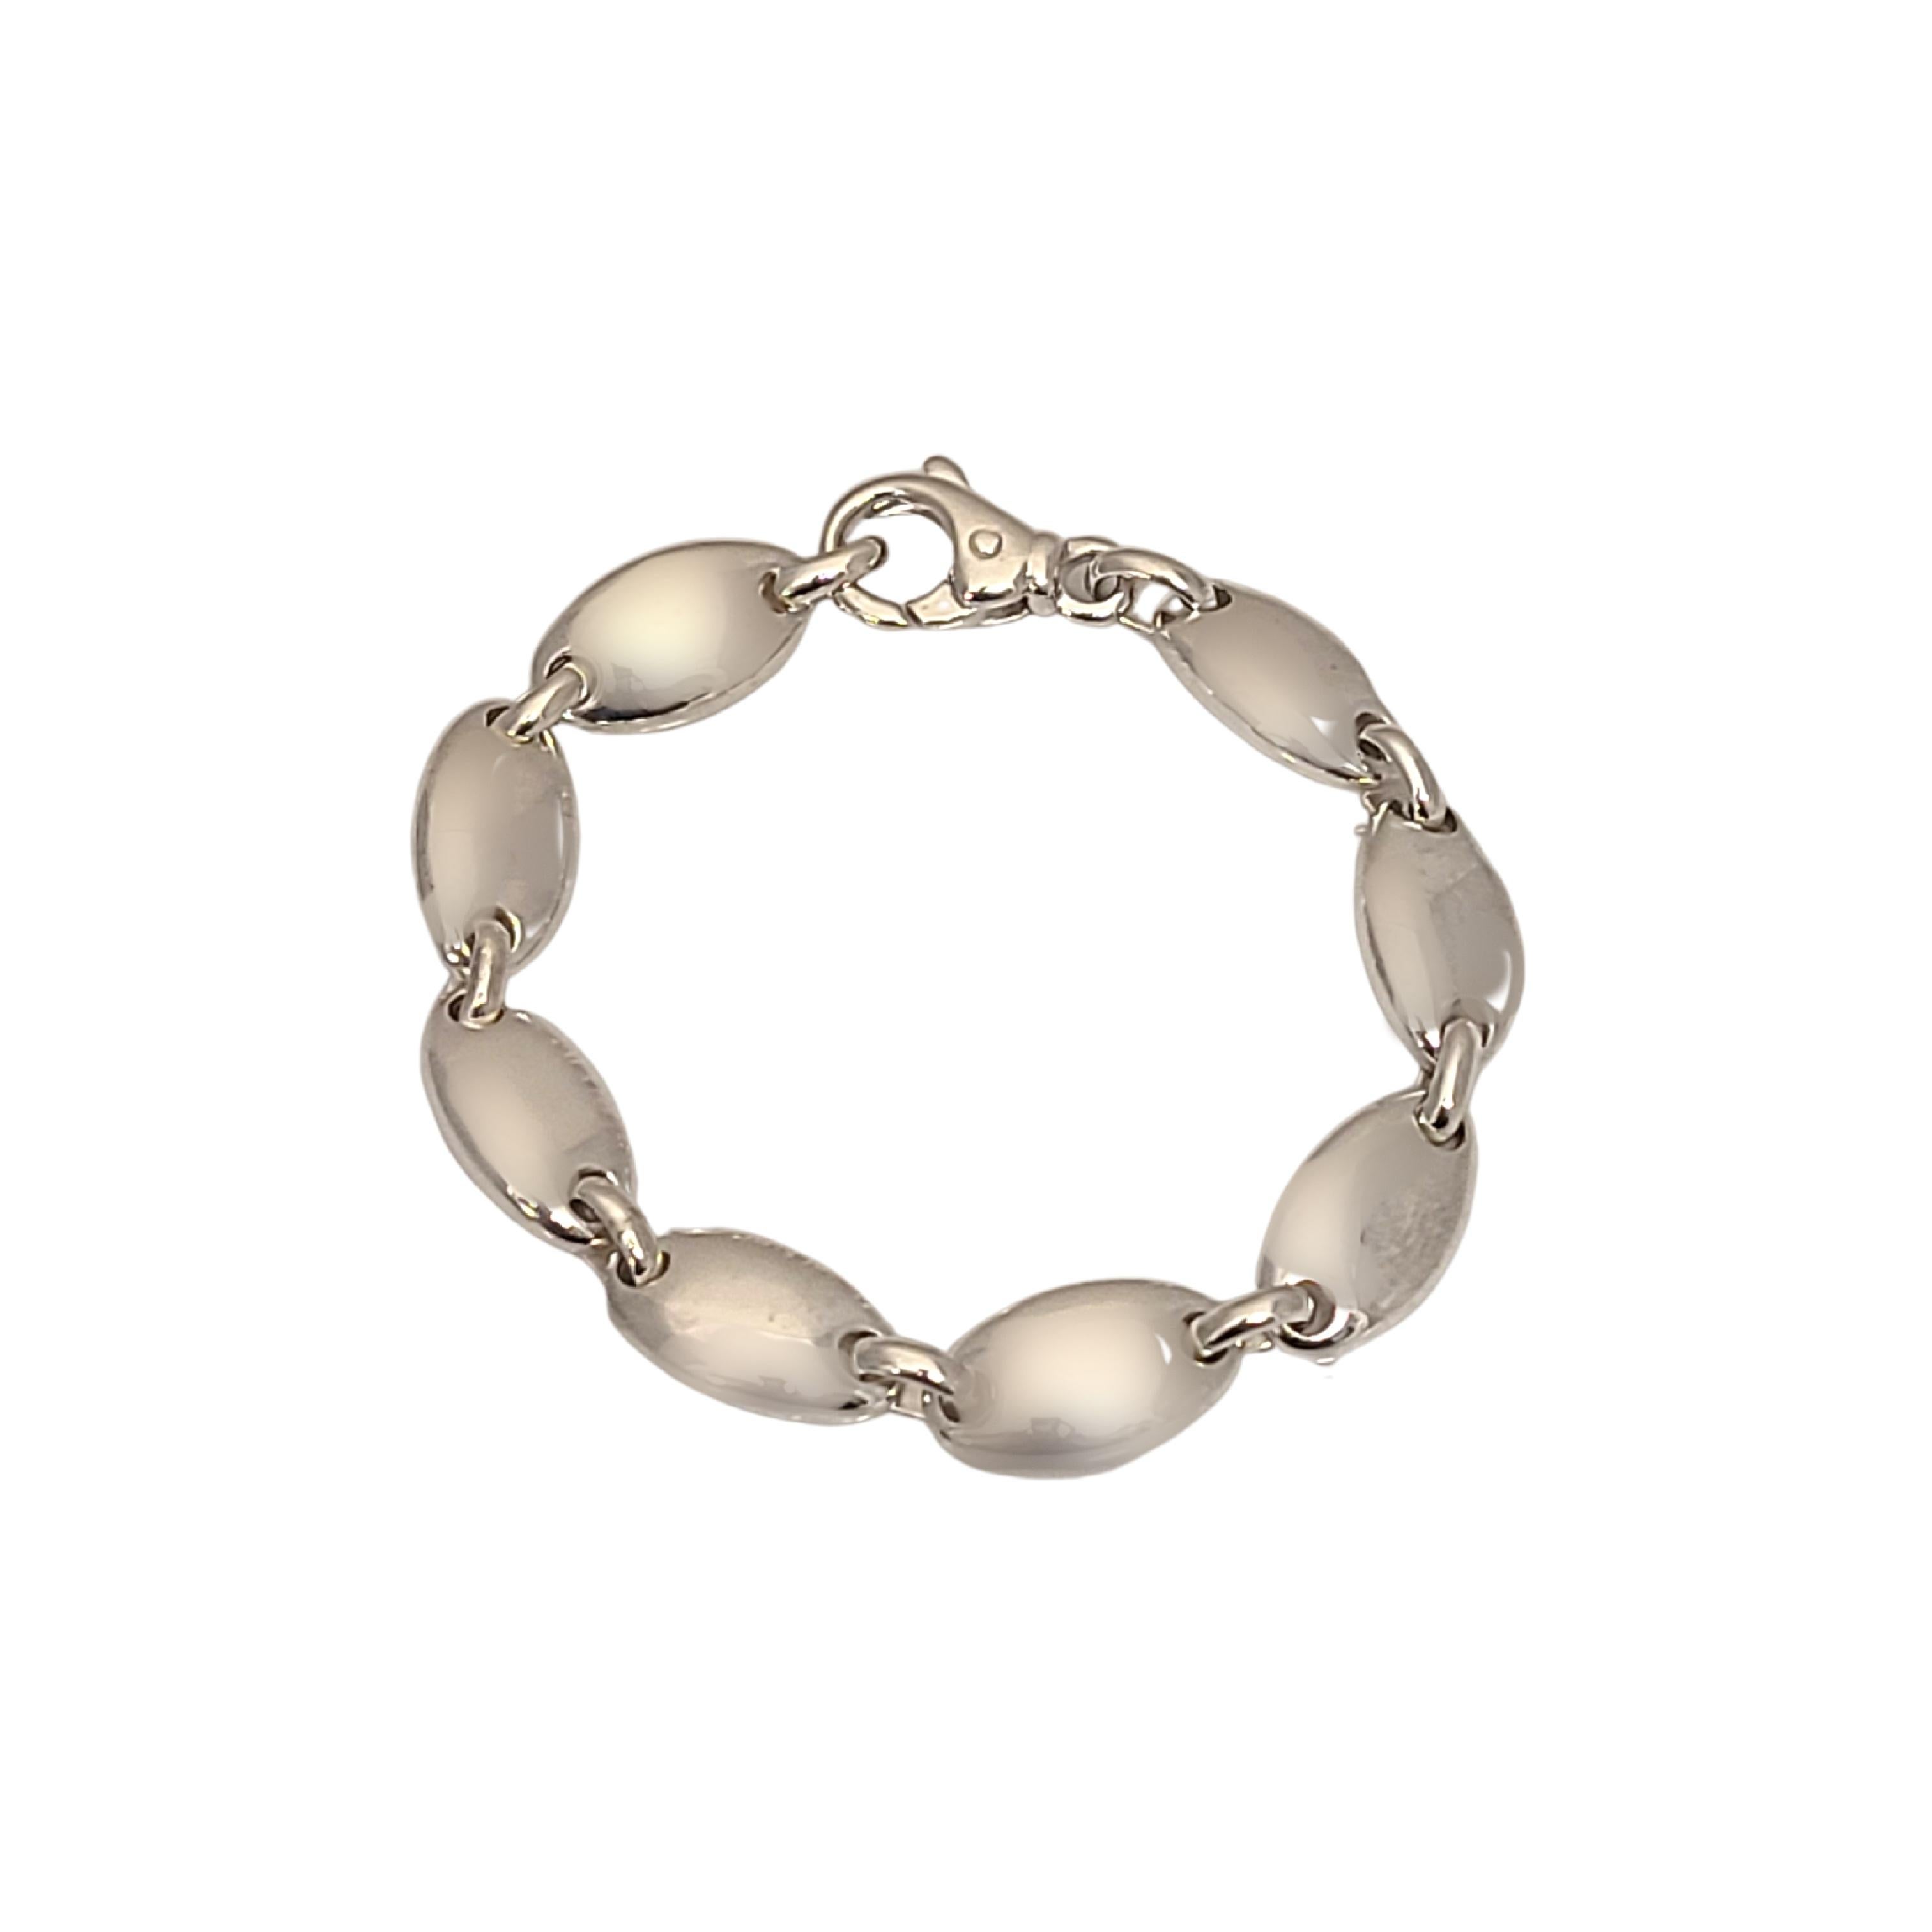 Tiffany & Co sterling silver pebble oval link bracelet with pouch and box.

Authentic Tiffany bracelet featuring oval pebble links with lobster claw closure. Includes a Tiffany & Co box and pouch.

Measures approx 7 3/4